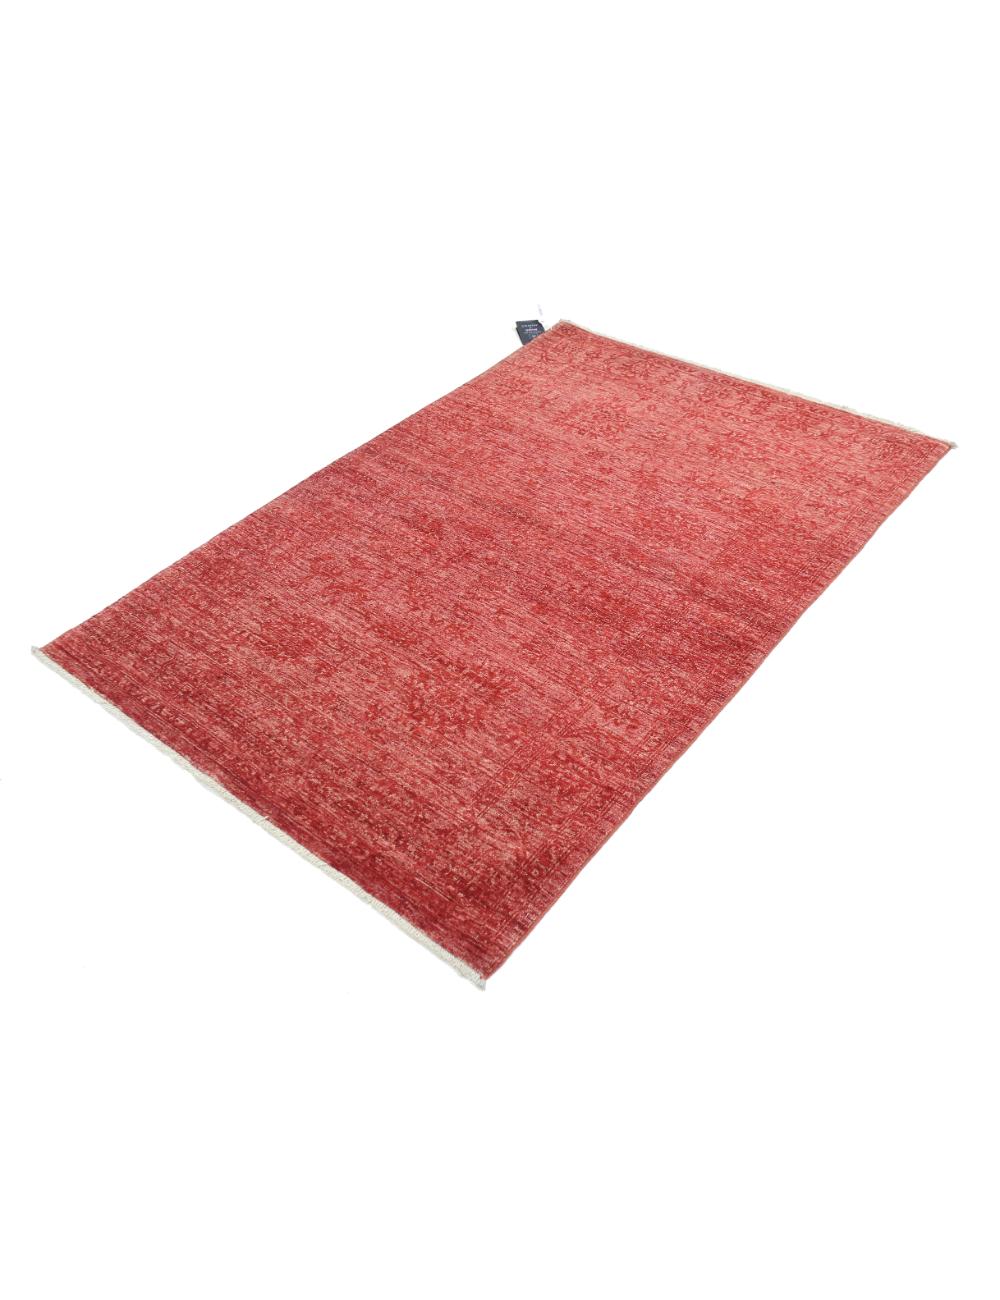 Ziegler 3' 10" X 5' 10" Hand-Knotted Wool Rug 3' 10" X 5' 10" (117 X 178) / Red / Red